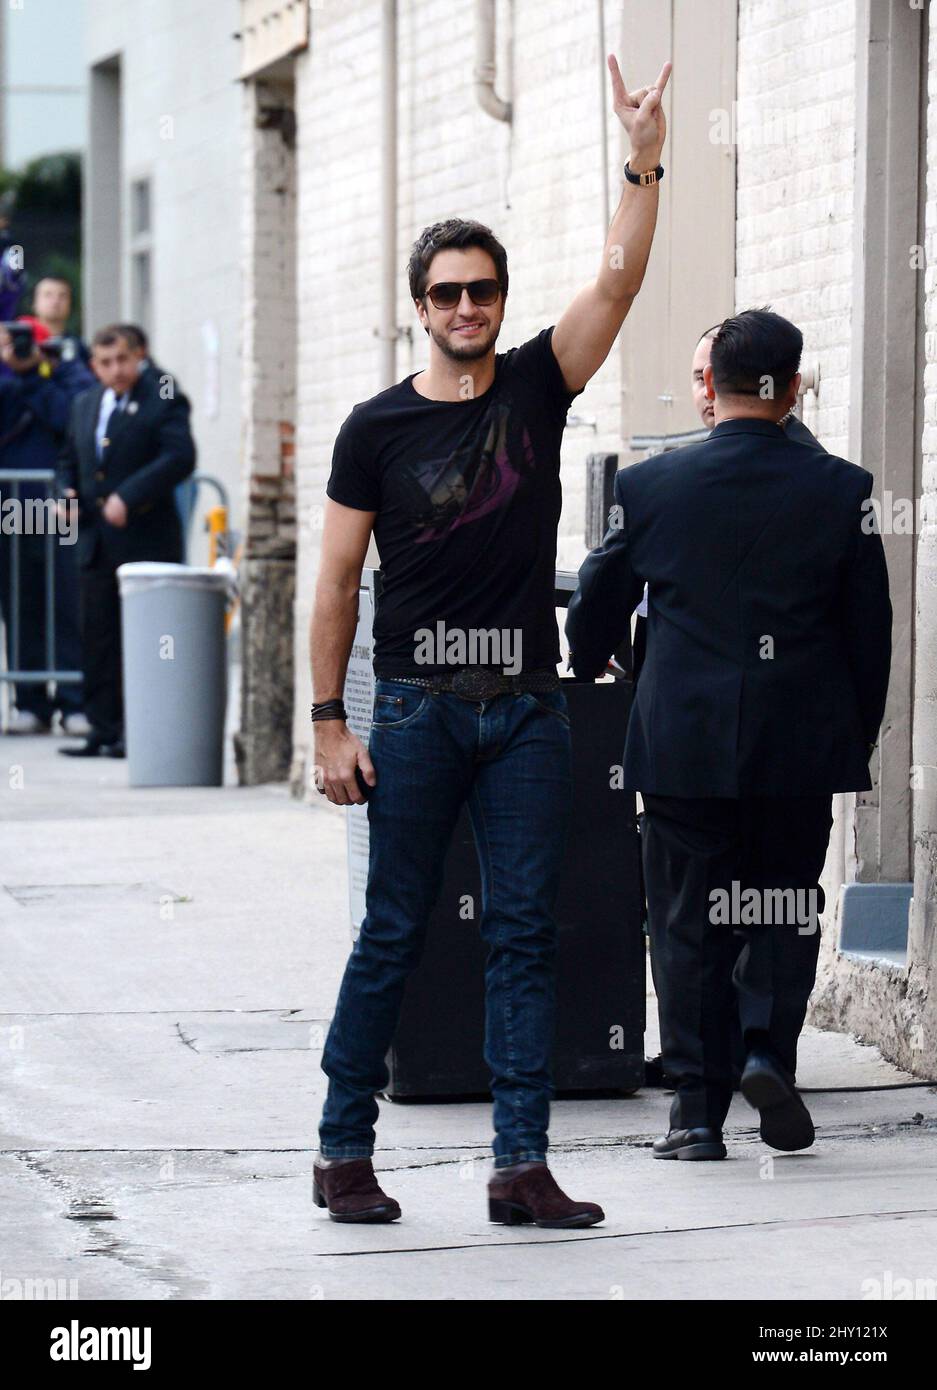 Luke Bryan seen arriving at the Jimmy Kimmel Live Show in Hollywood, California. Stock Photo